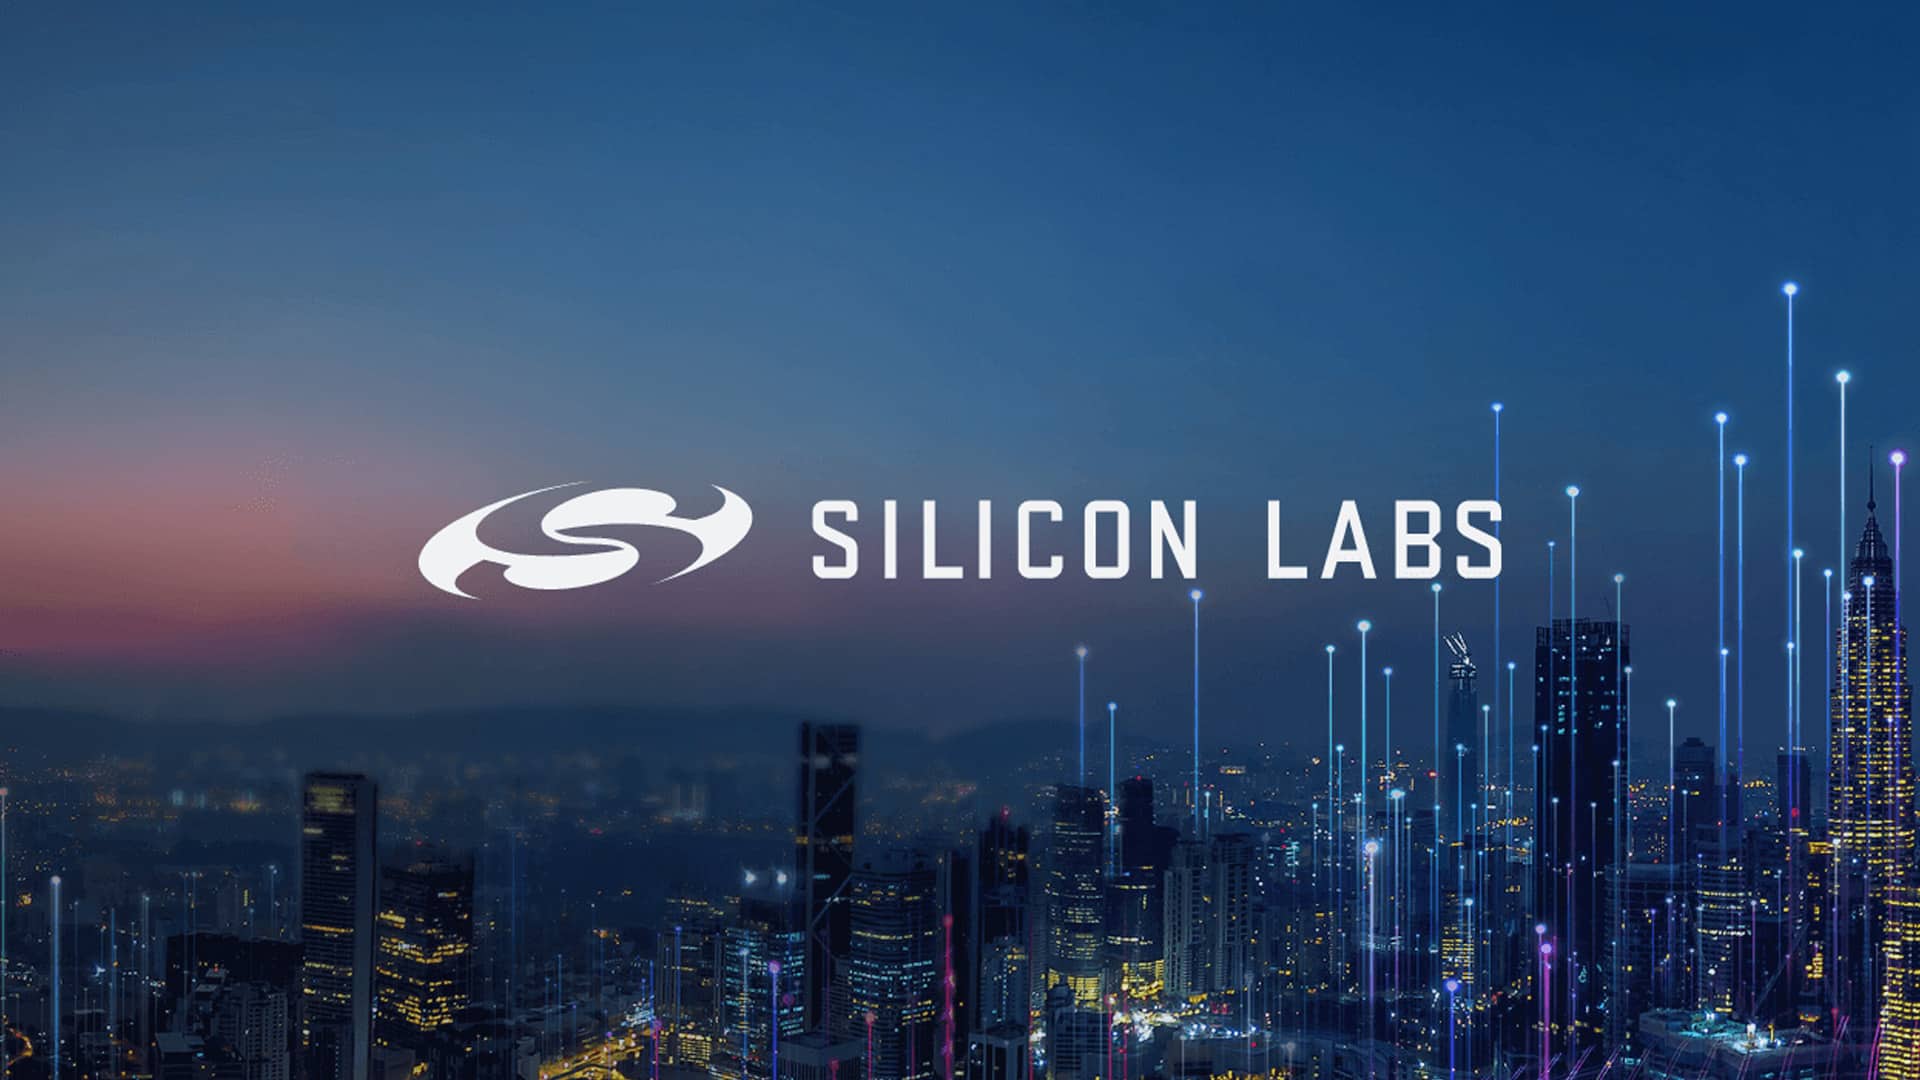 Silicon Labs Announces Next Generation Series 3 Platform to Create a Smarter, More Efficient IoT